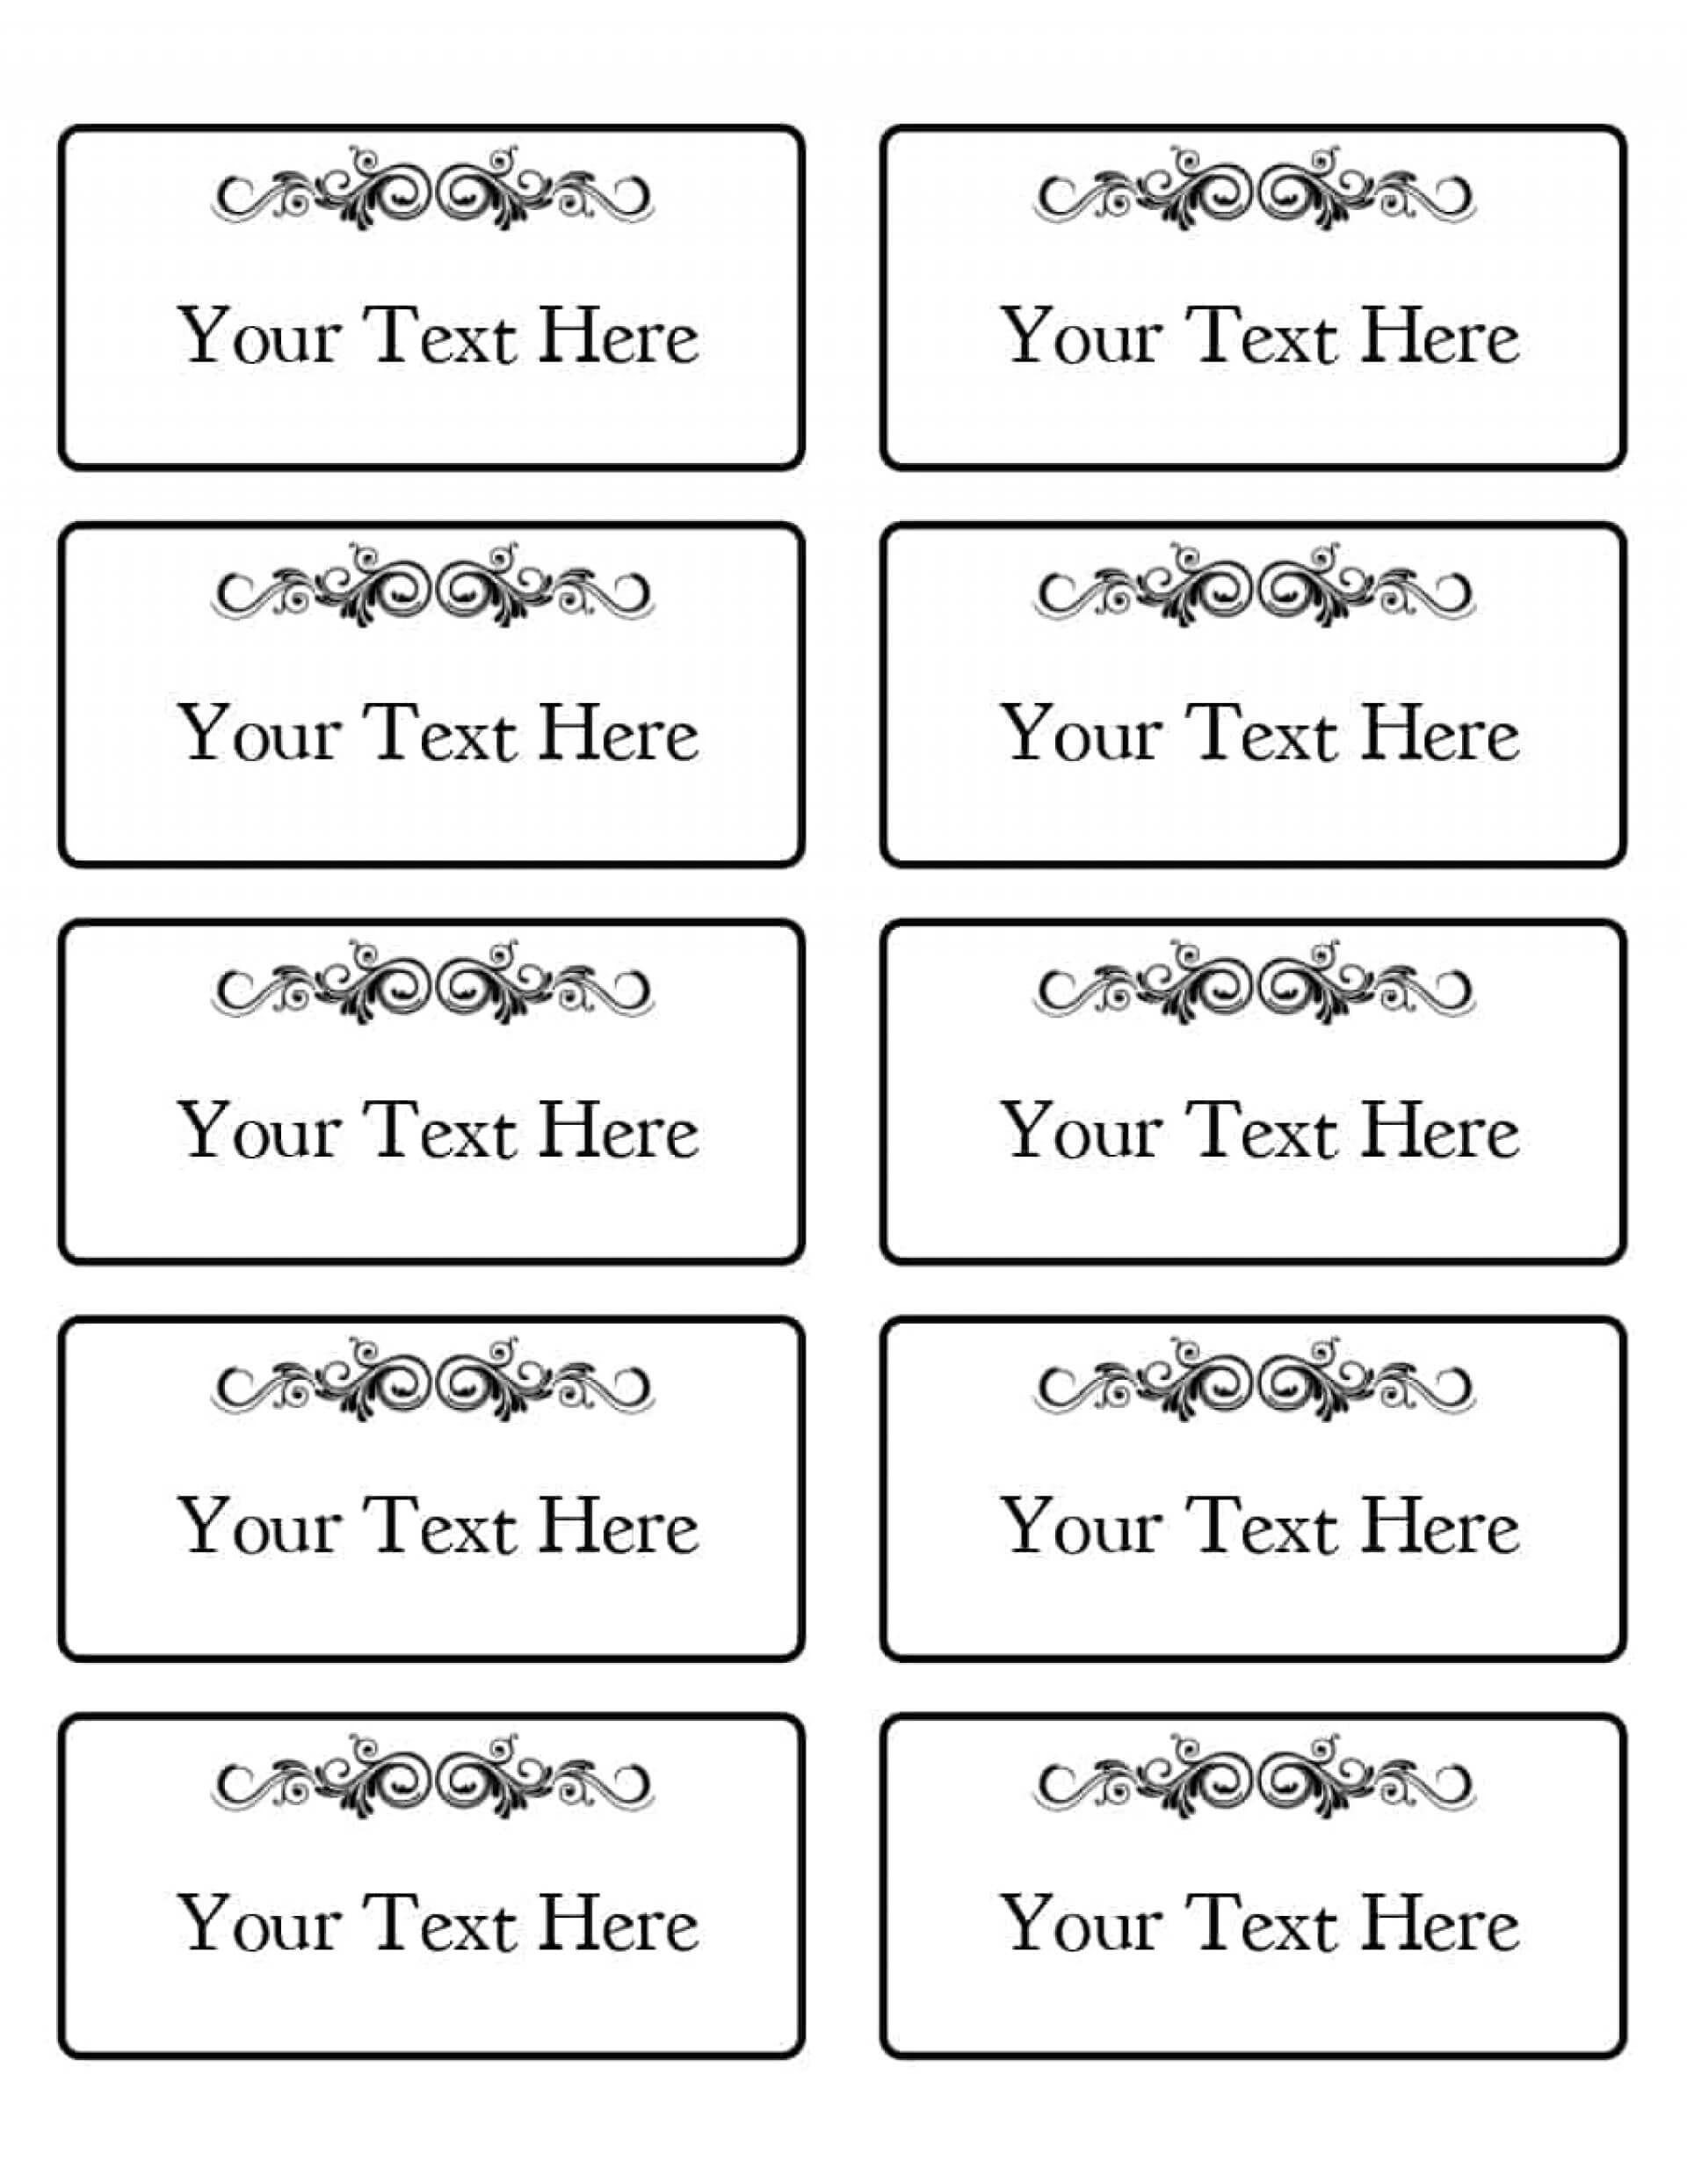 004 Microsoft Word Name Tag Template Unforgettable Ideas With Name Tag Template Word 2010